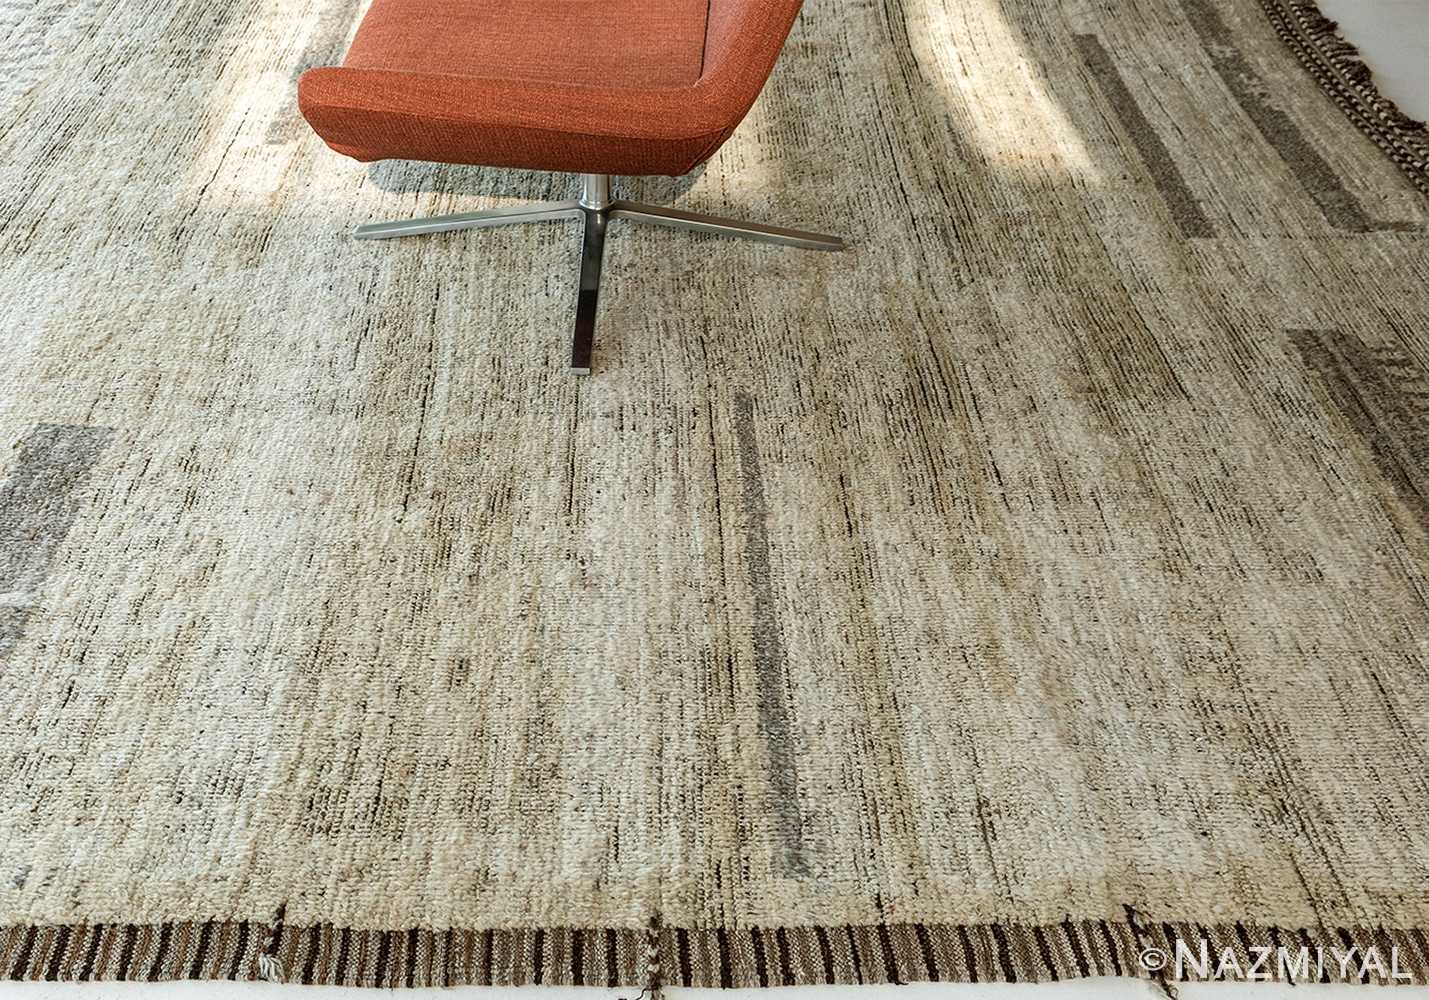 Border Of Earth Tone Modern Distressed Rug 60698 by Nazmiyal Antique Rugs